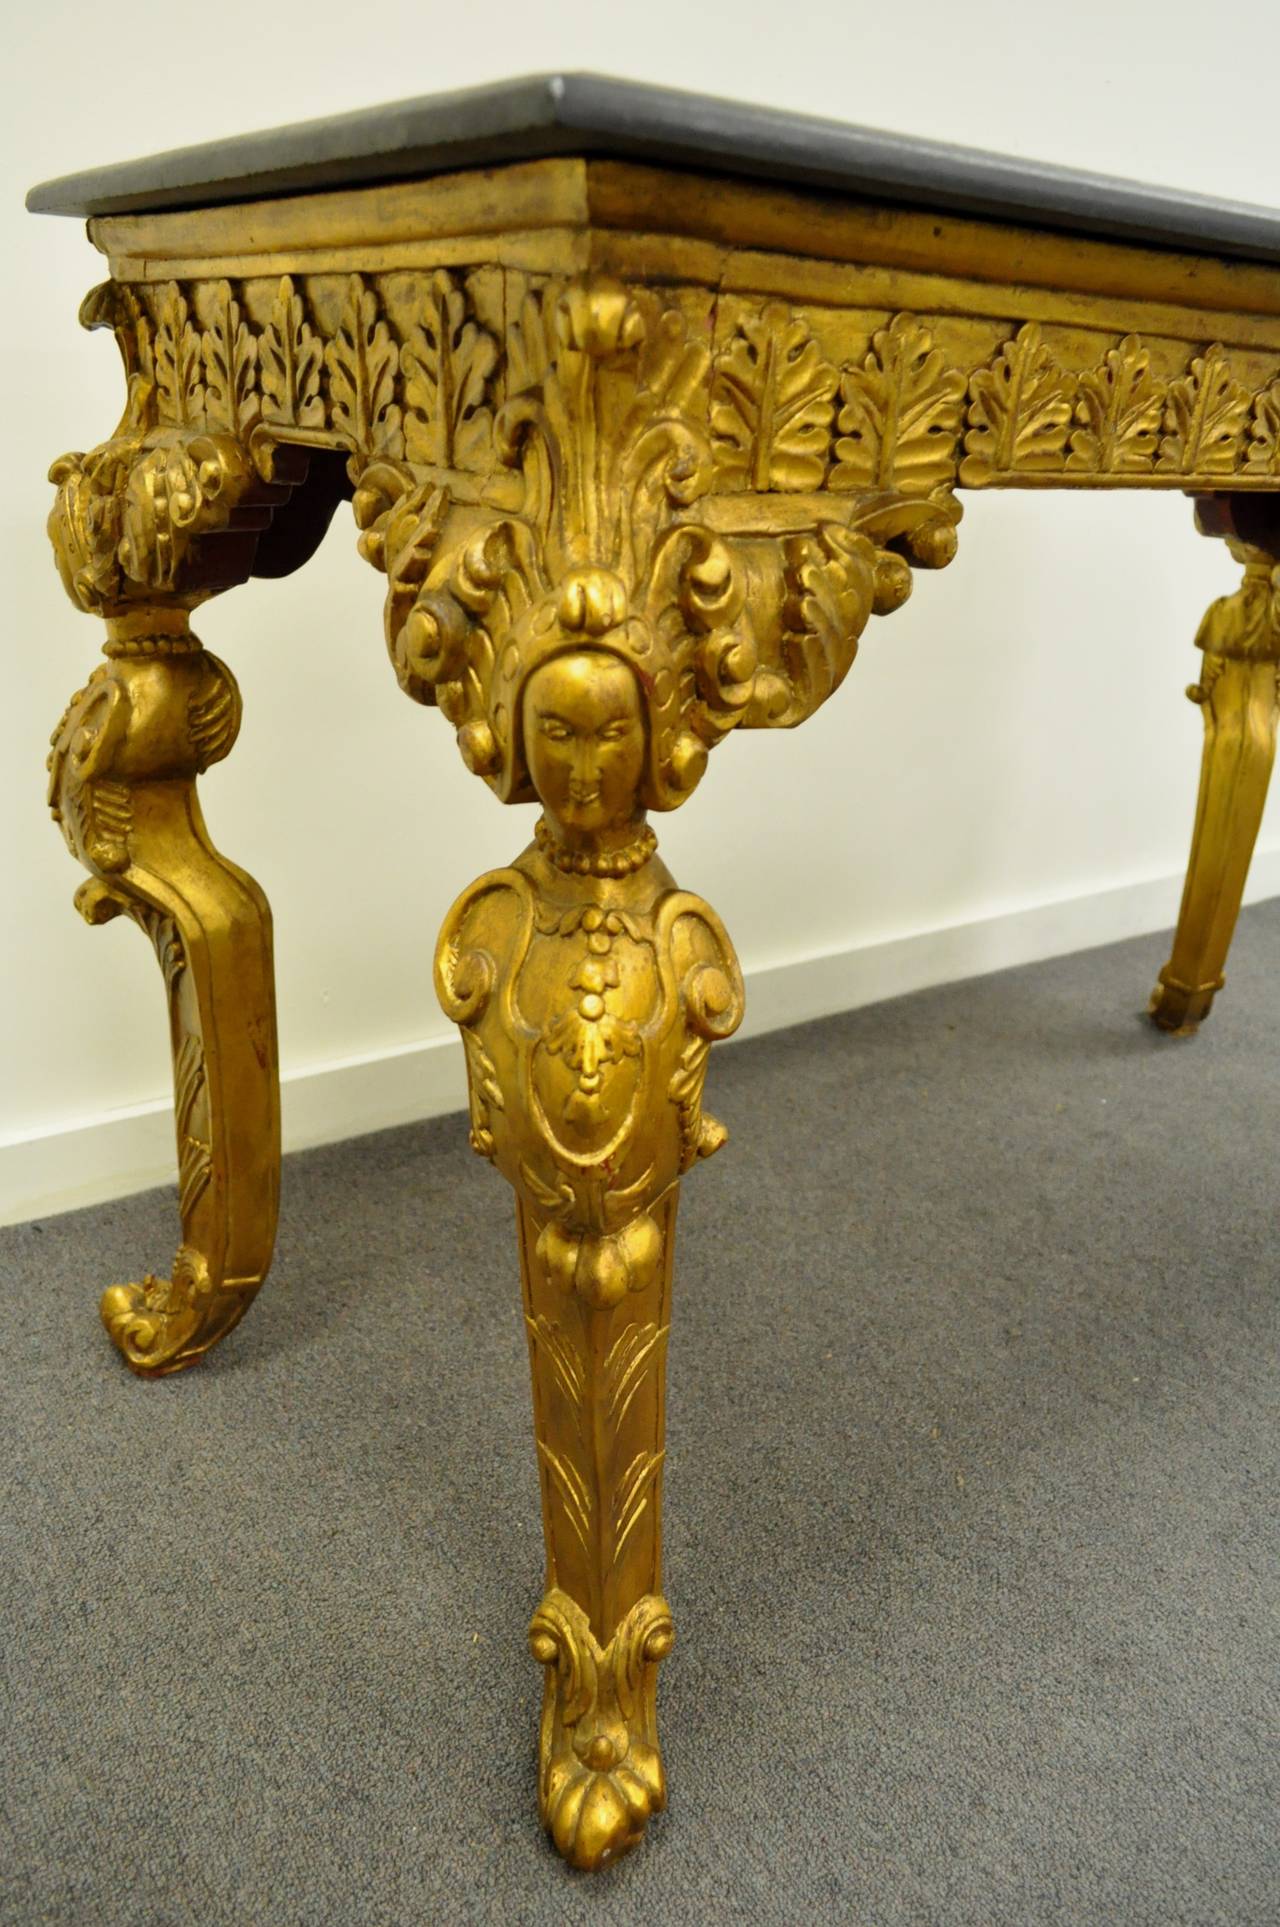 Striking vintage French Baroque style gold gilt carved wood and marble top console table. The table features shapely cabriole legs with elaborately carved female figures, acanthus accents around the skirt, and a thick marble top.